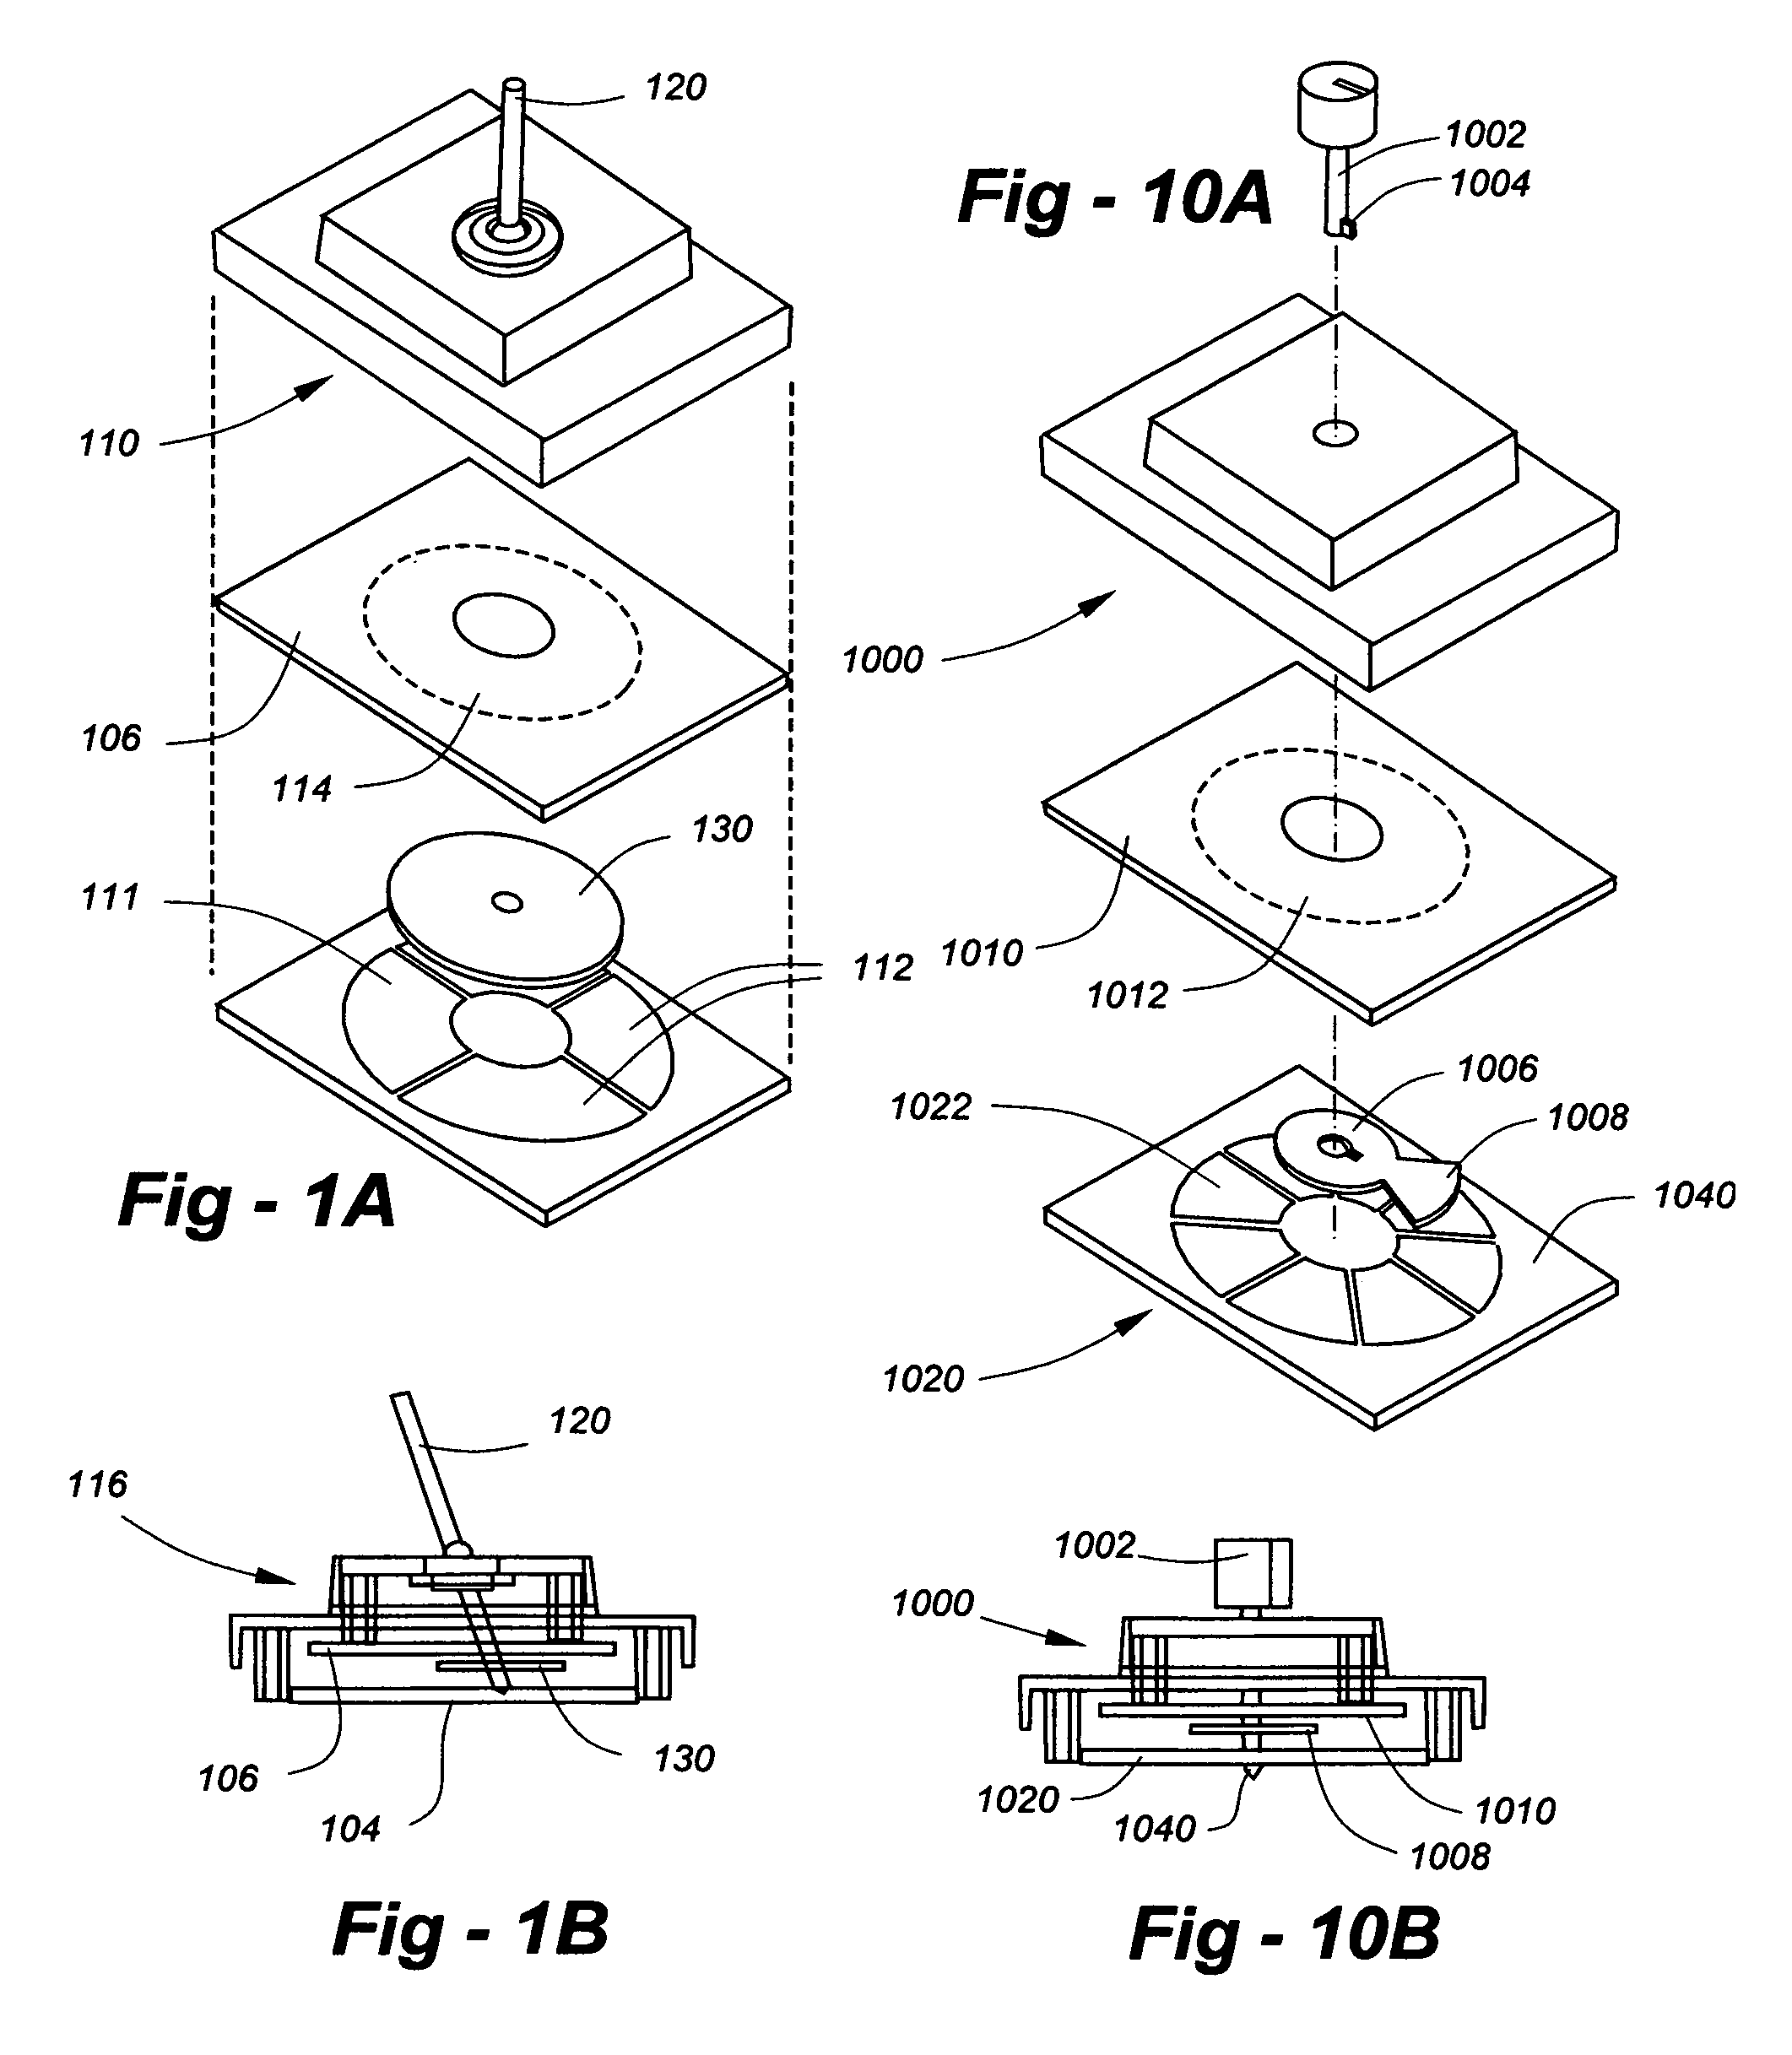 Moving dielectric, capacitive position sensor configurations